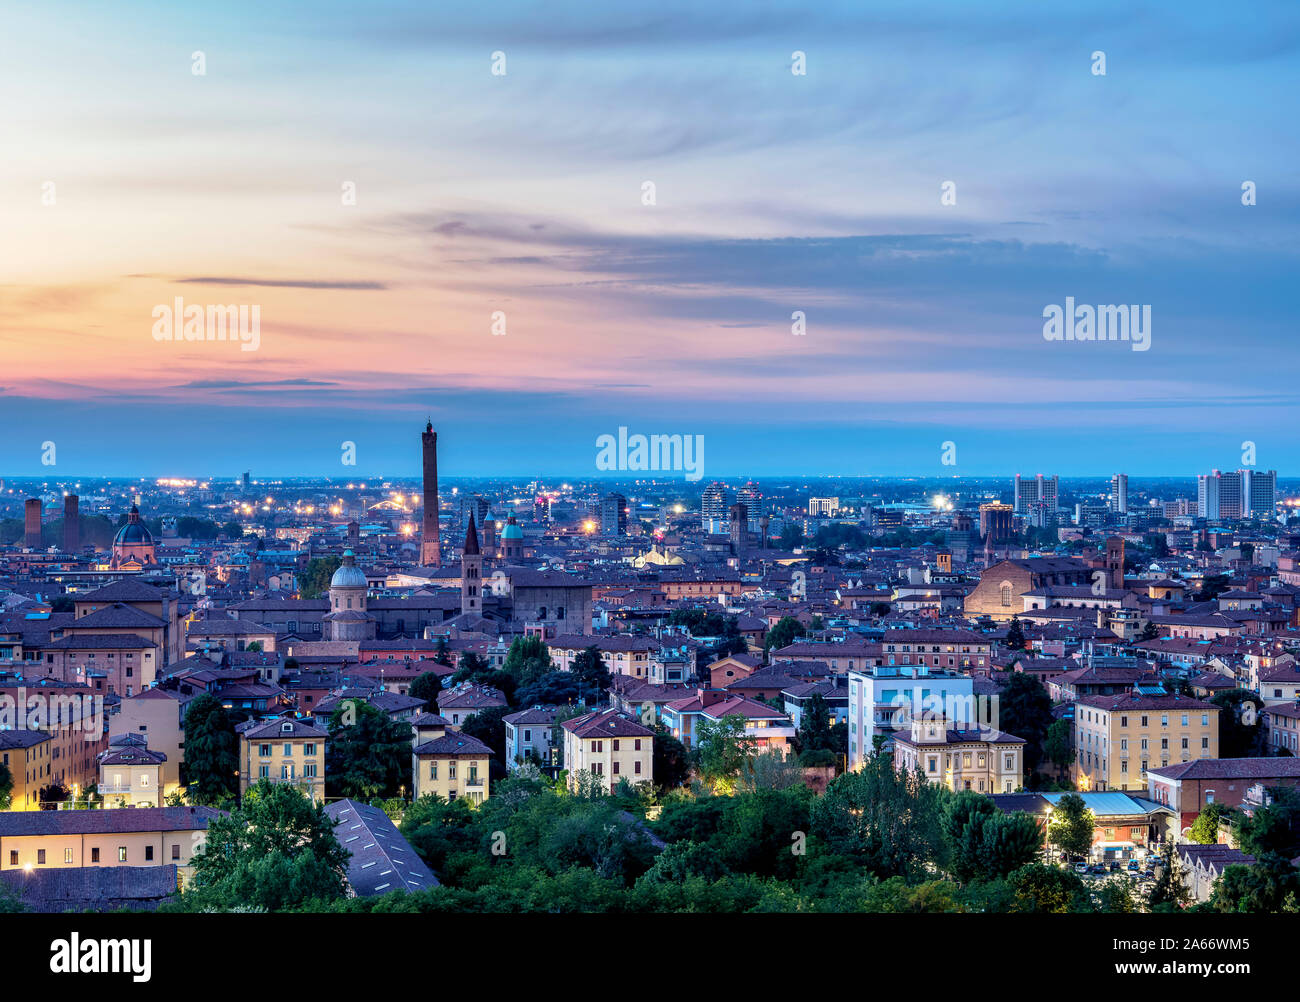 Cityscape with San Domenico Basilica and Asinelli Tower at dusk, elevated view, Bologna, Emilia-Romagna, Italy Stock Photo